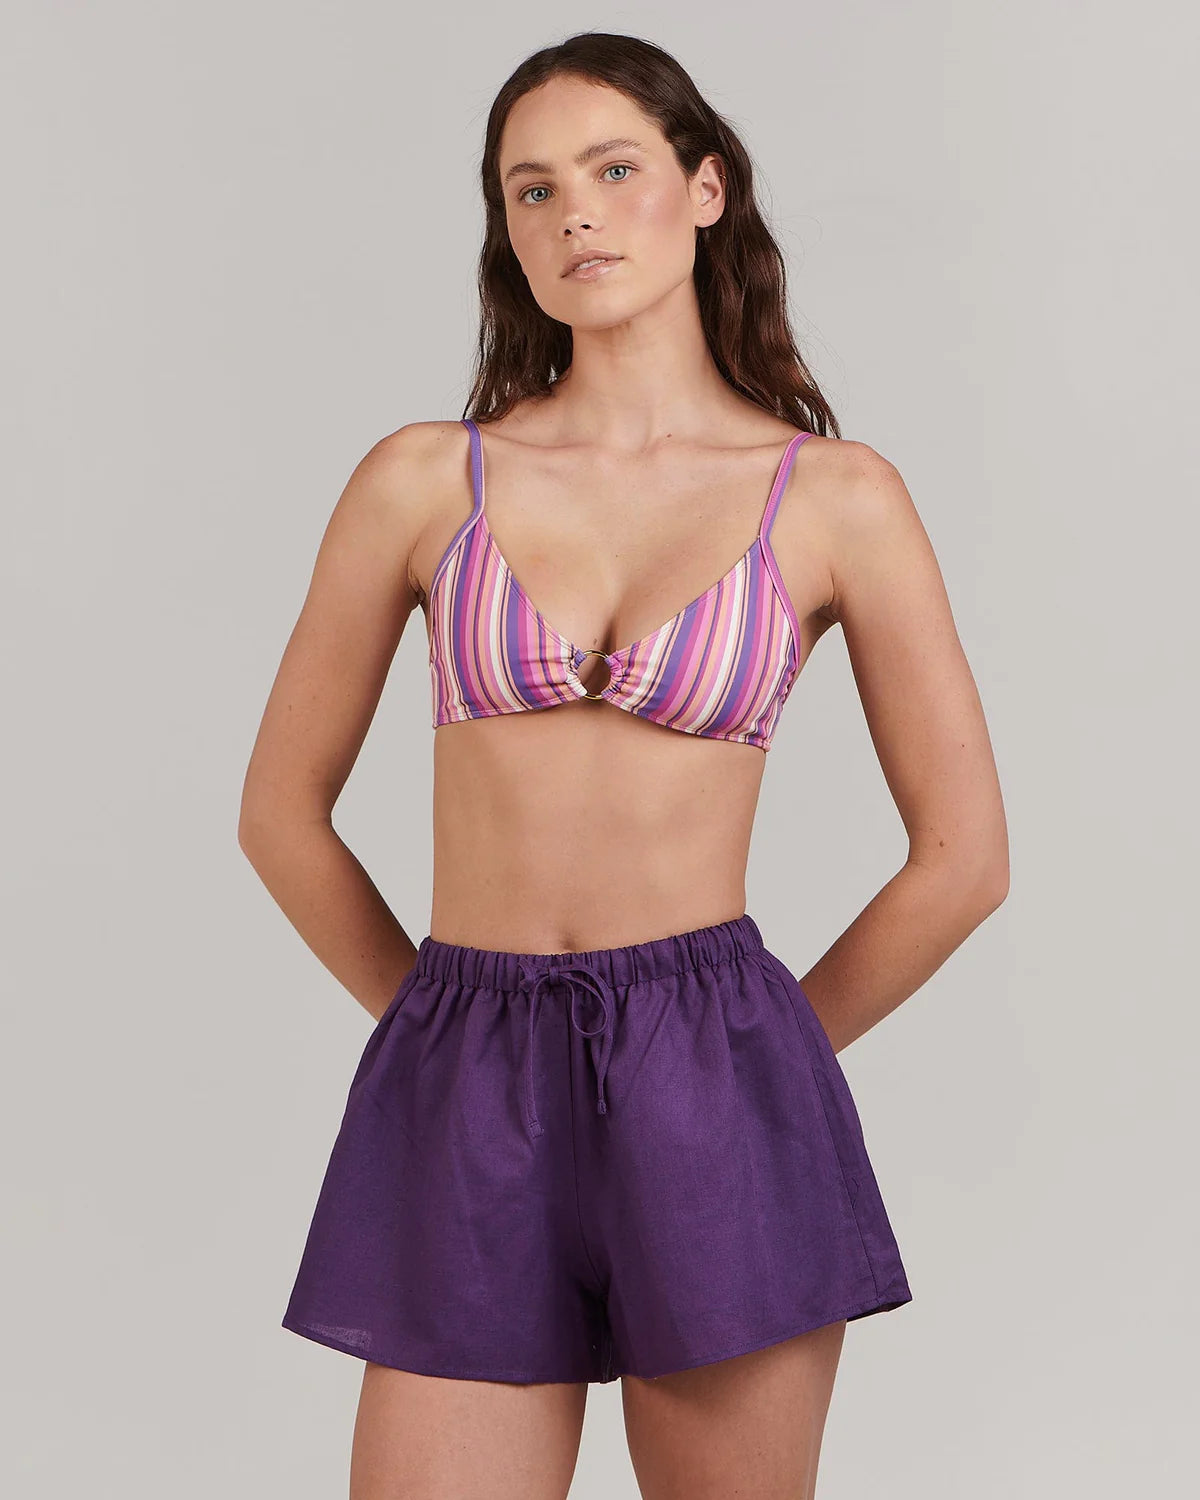 In a relaxed fit and saturated purple hue, this linen-blend short is all comfort and style. Wear with the coordinating Harlow shirt for weekend hangs.